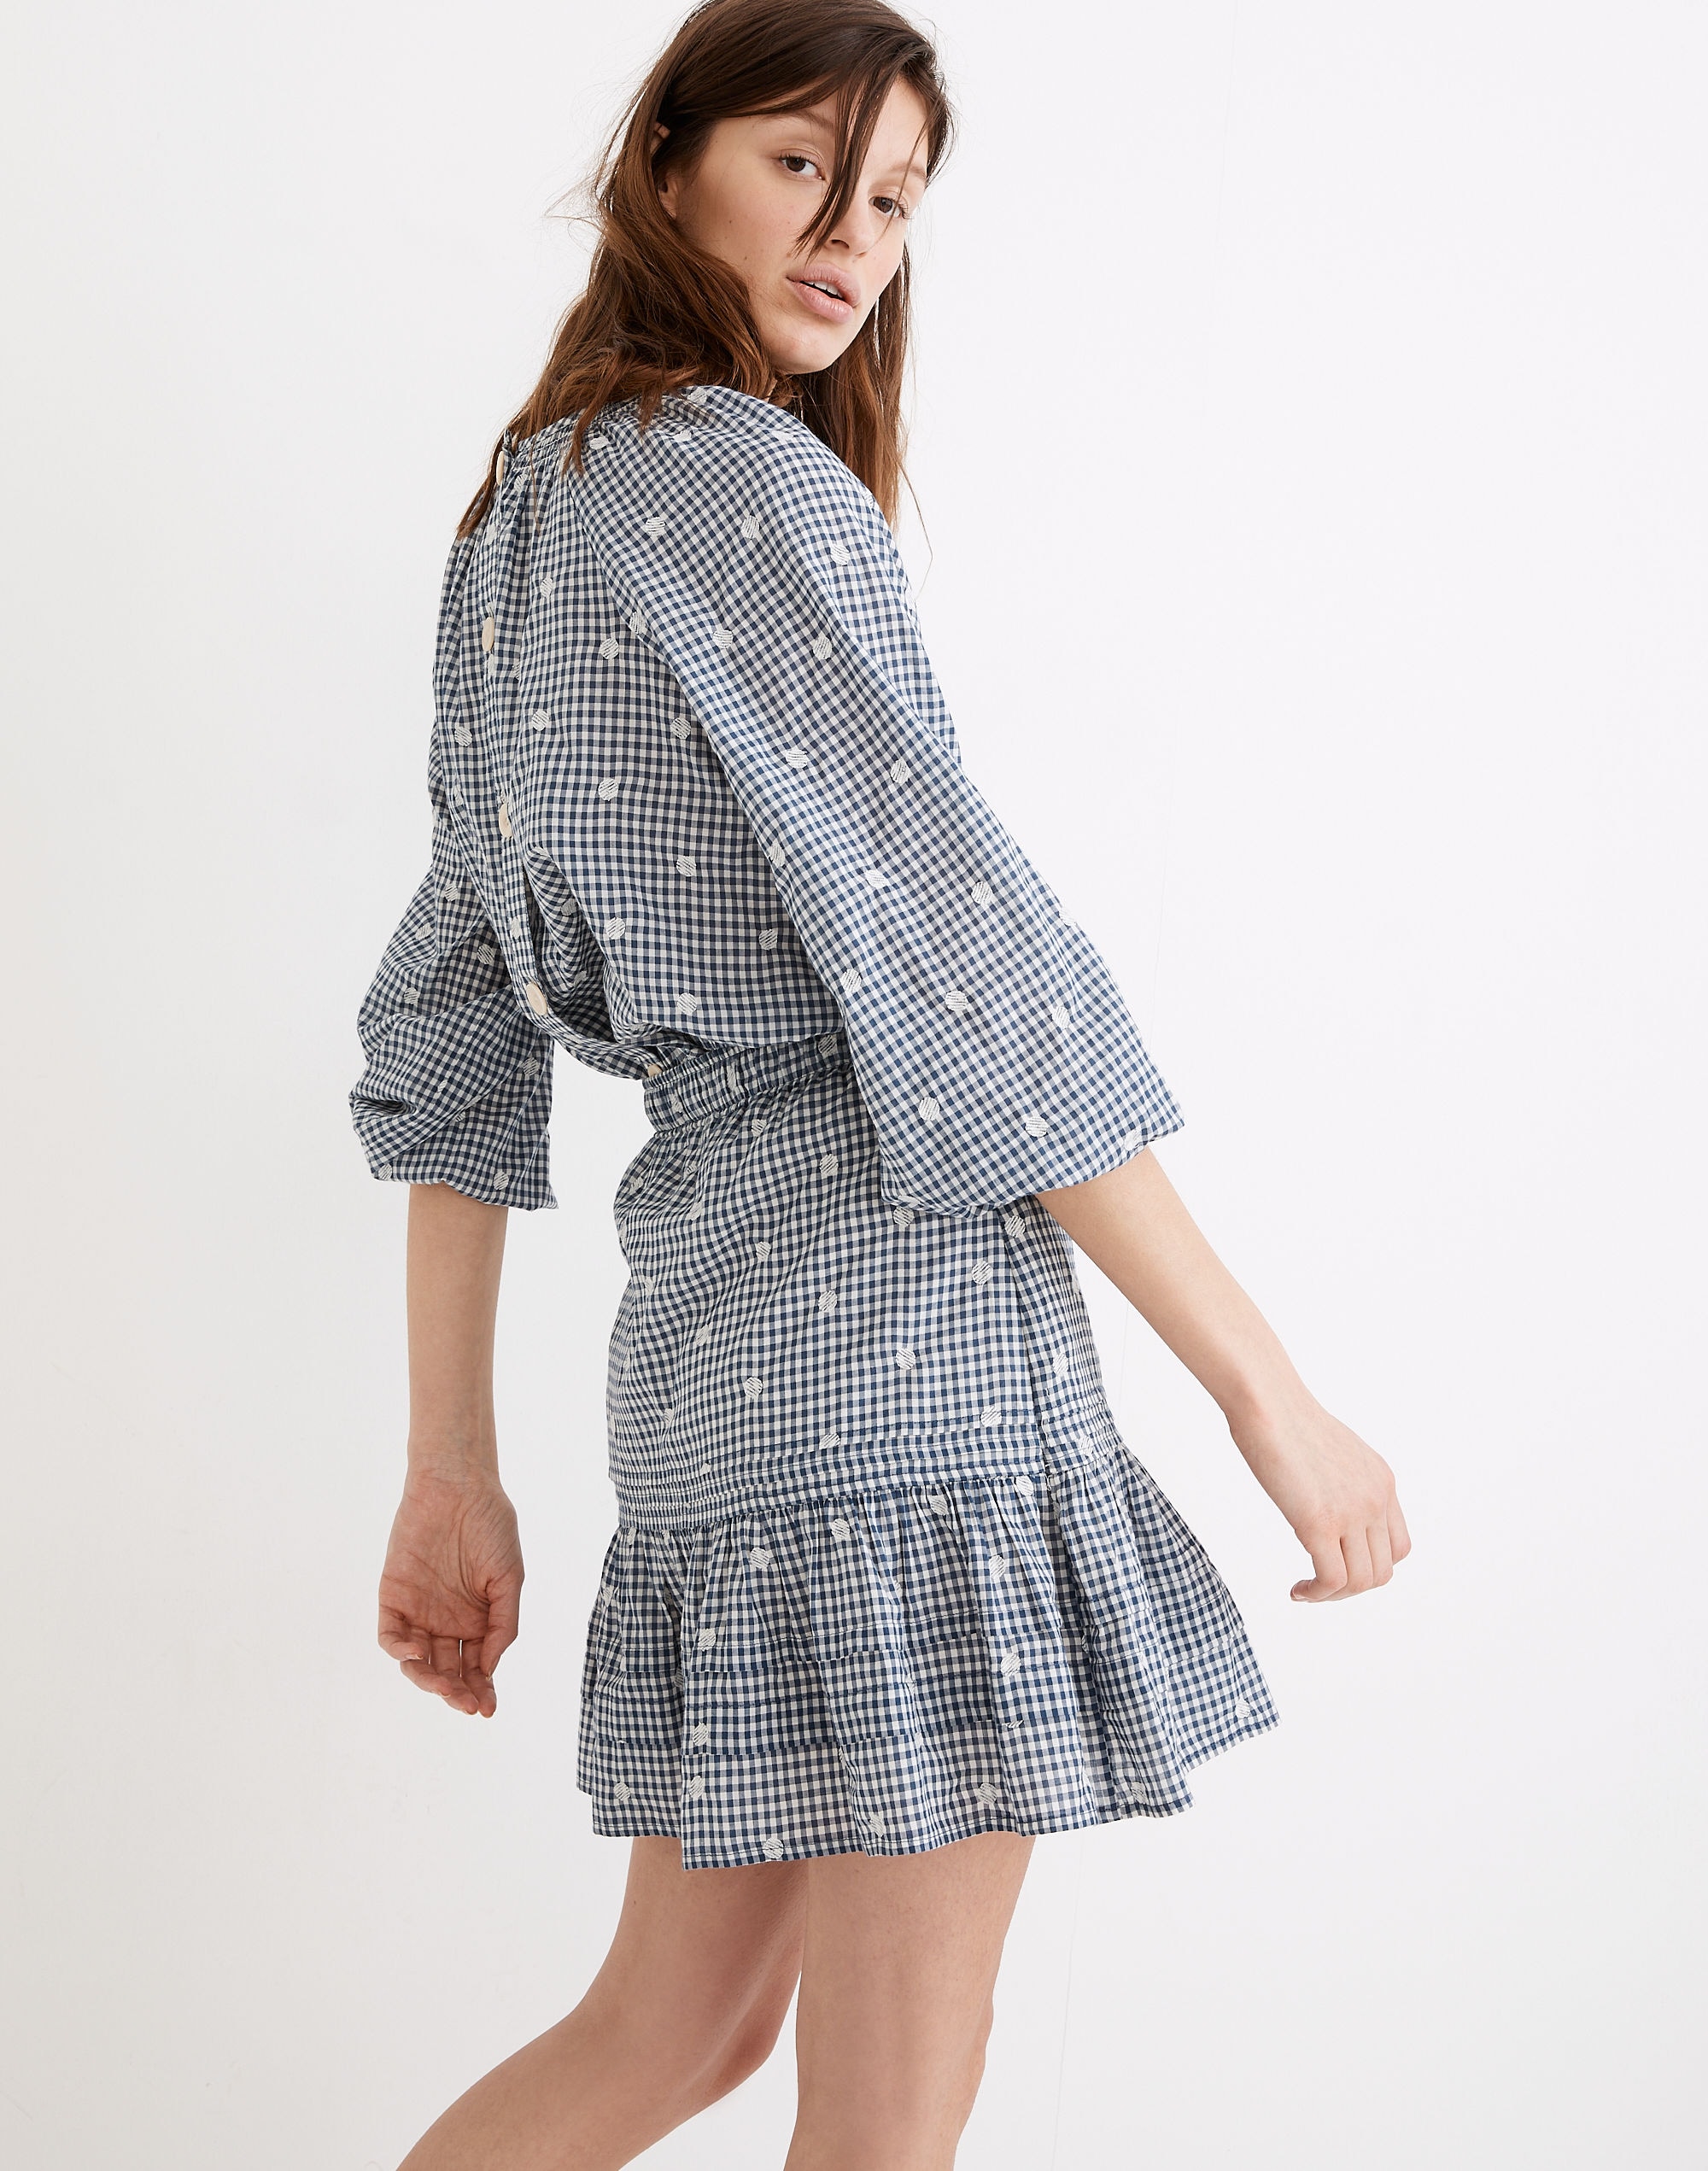 Embroidered Tiered Pull-On Mini Skirt in Gingham Check